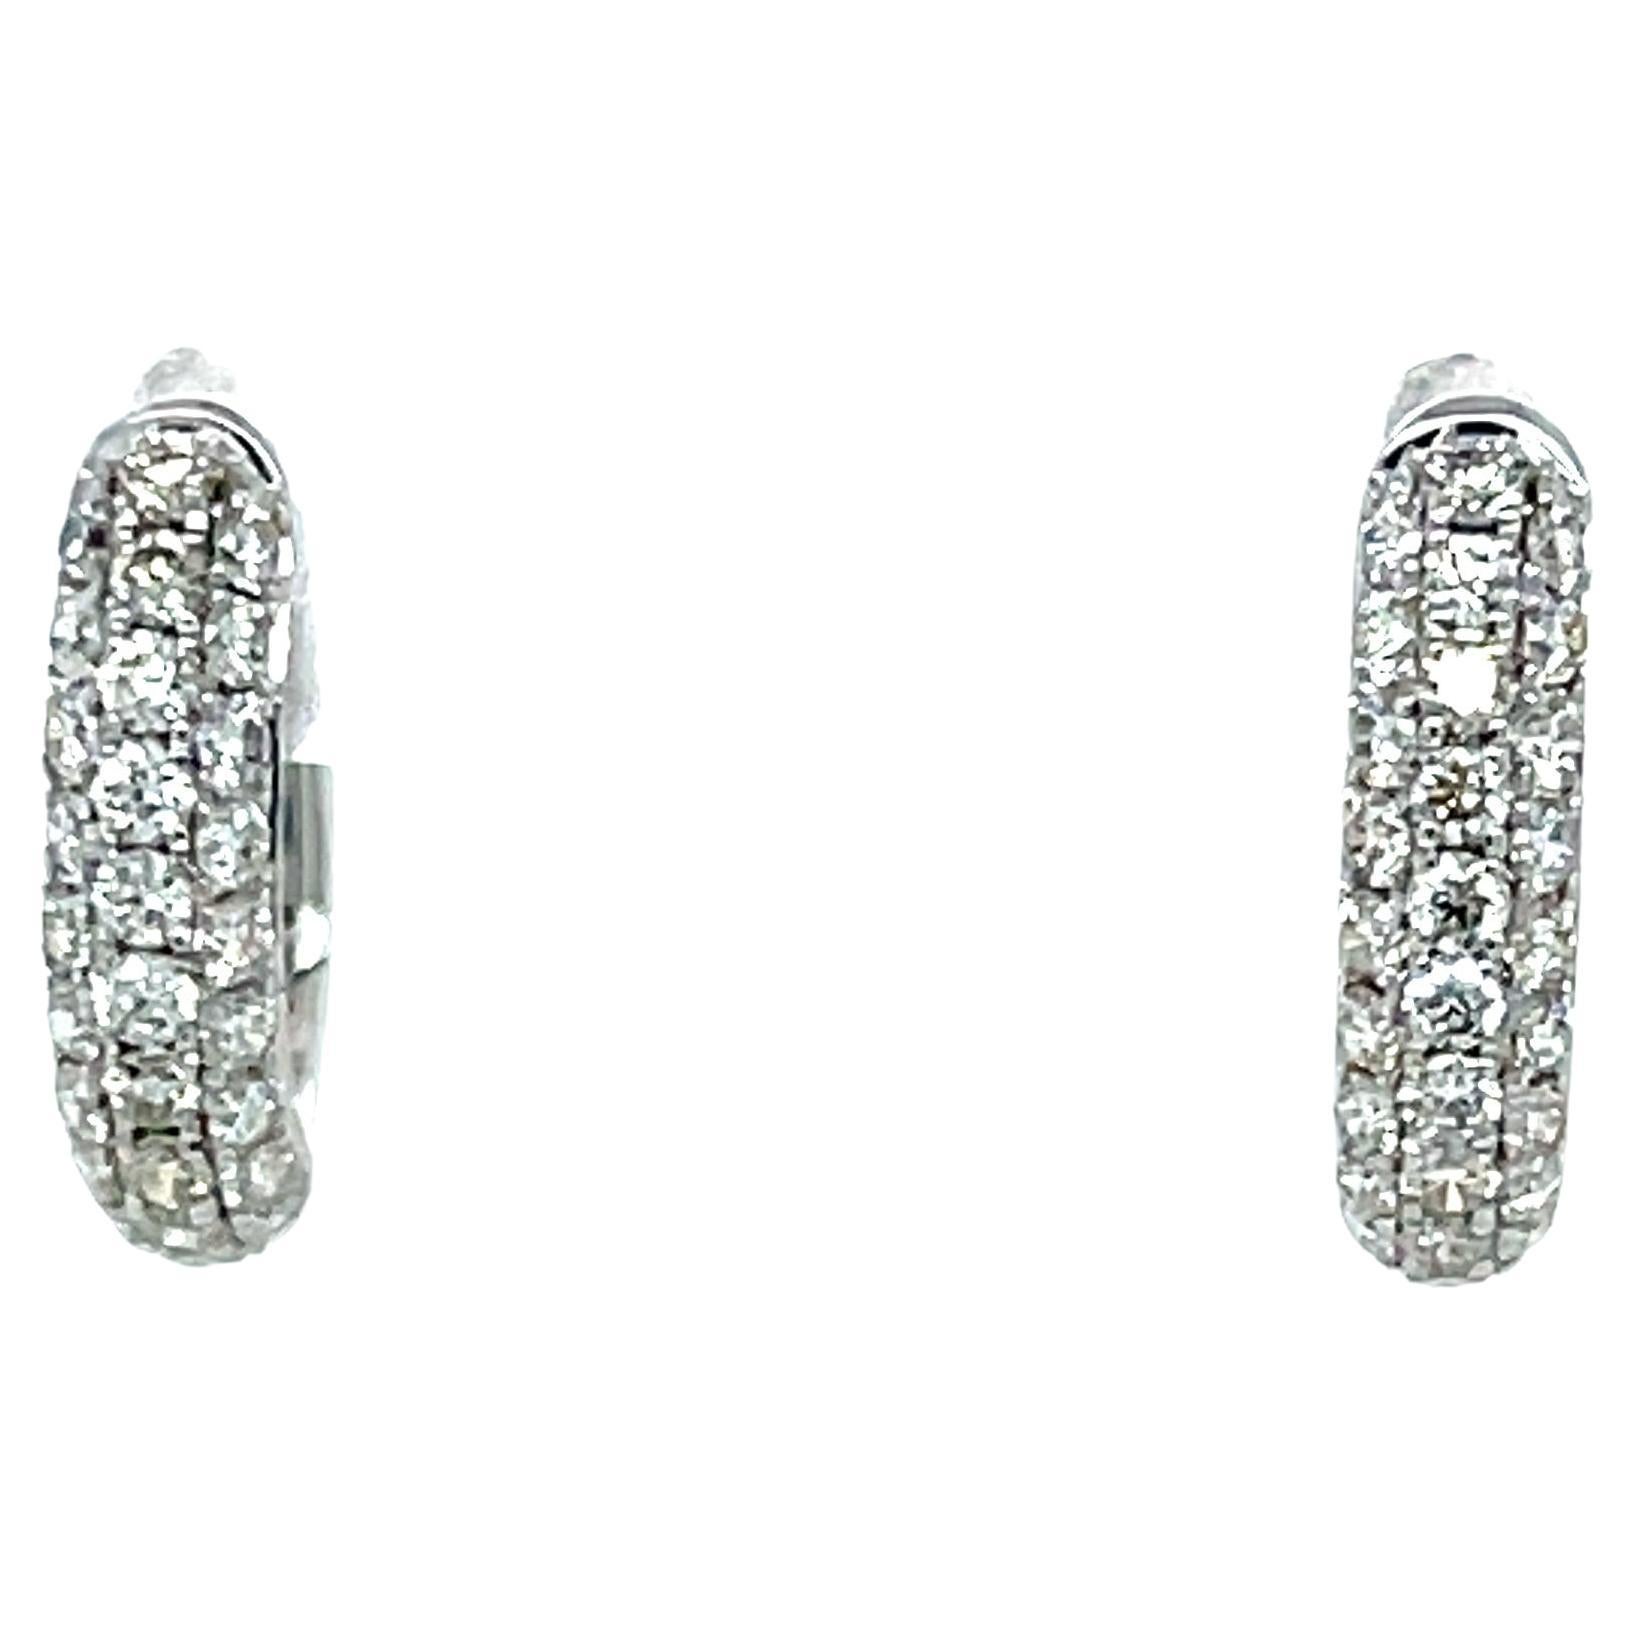 These pretty diamond and 18k white gold hoop earrings will make a perfect gift for yourself or a loved one! Three rows of pave-set white brilliant diamonds weighing nearly a half a carat total adorn these lovely hoops, making them sparkle from every